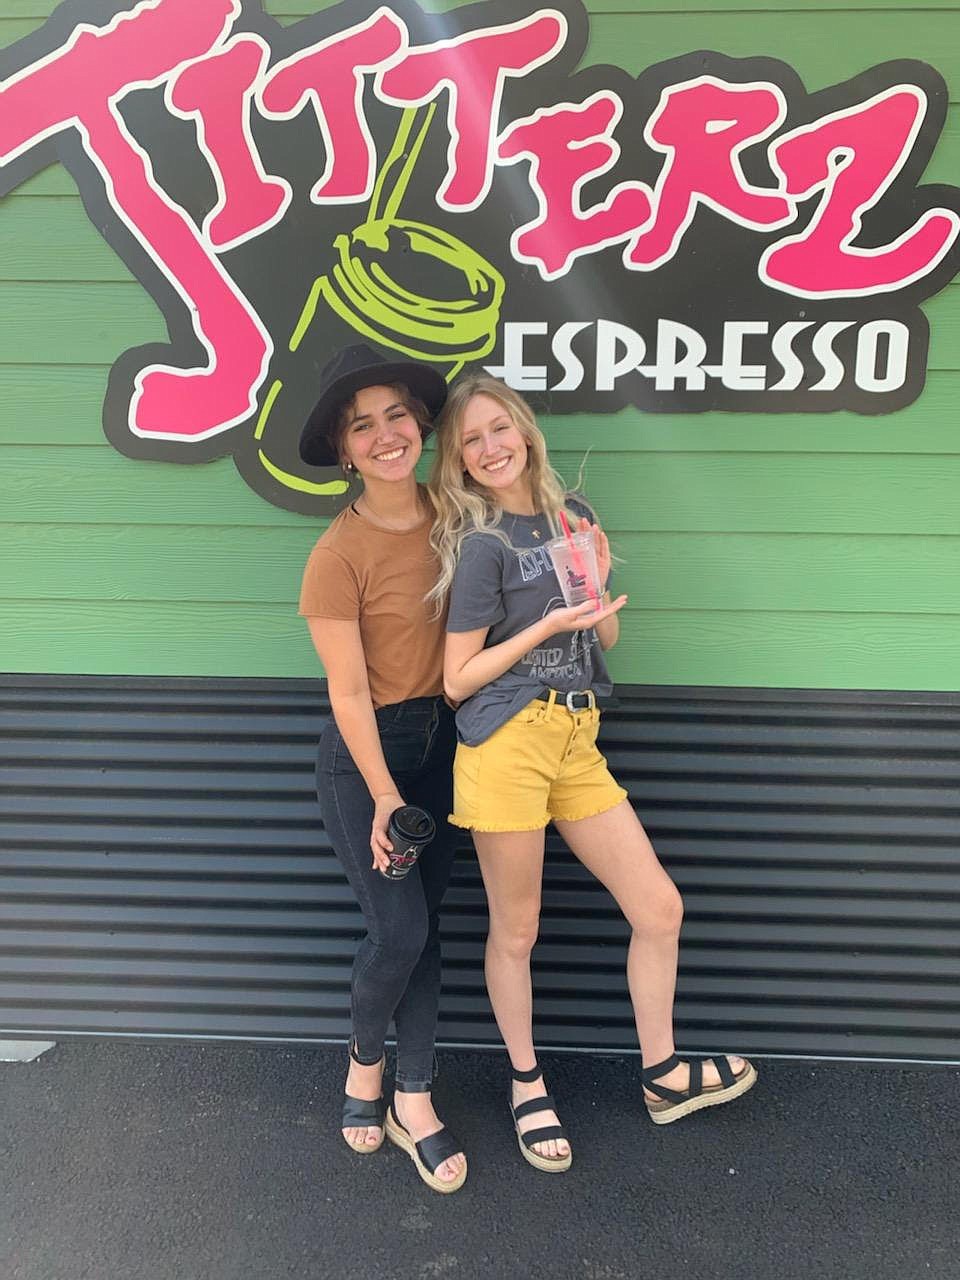 Stella Kirby and Lillian Brennan at the new Jitterz Espresso stand, at the southeast corner of U.S. 95 and Wyoming Avenue.